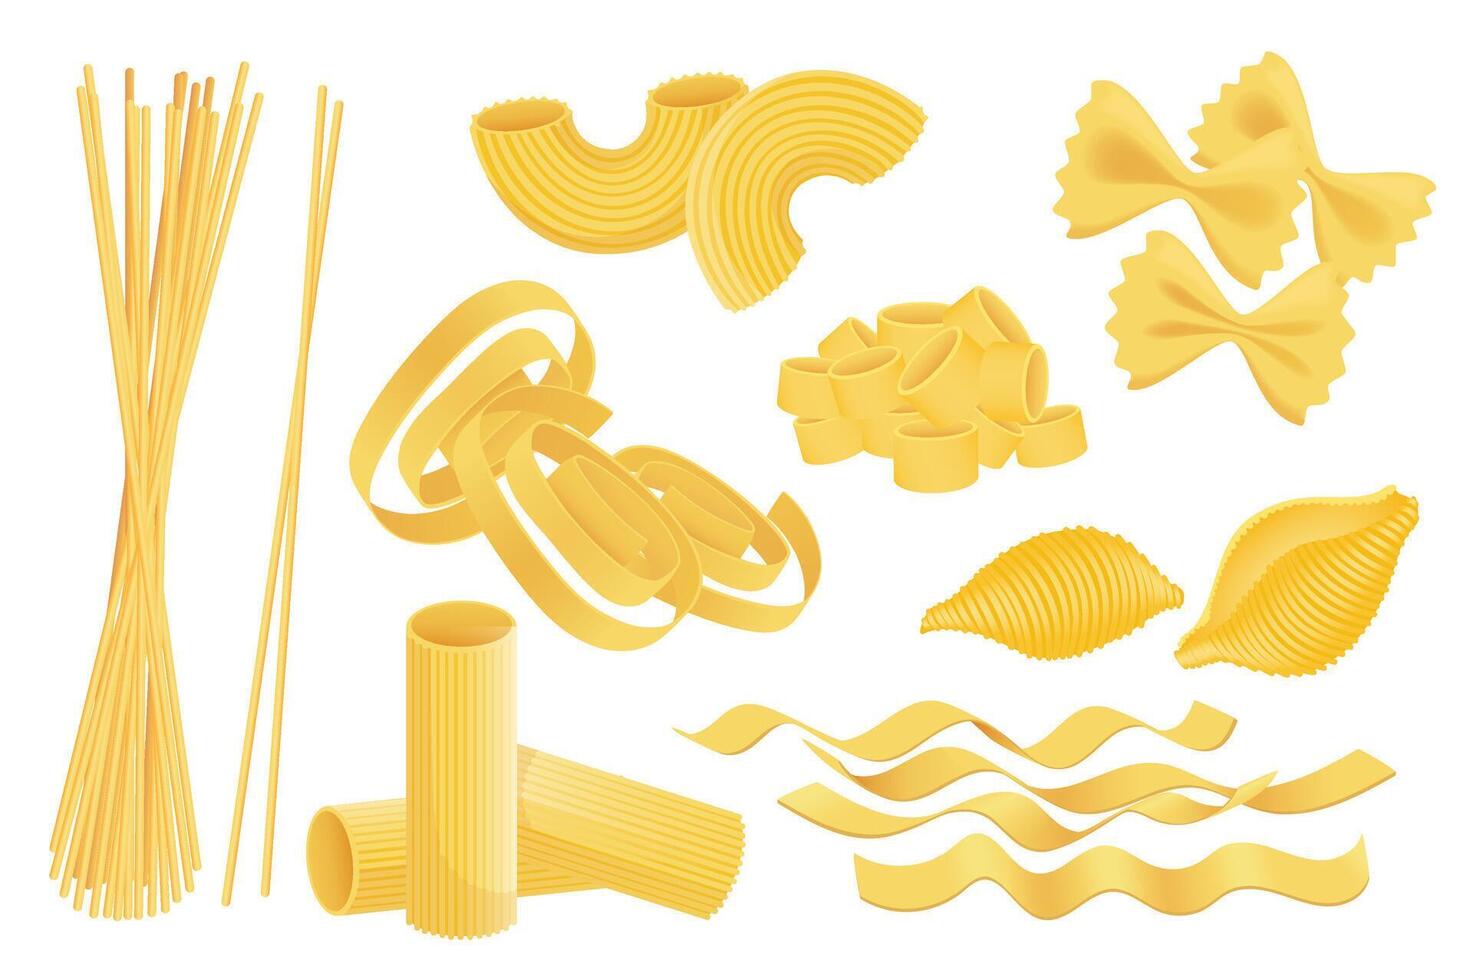 Italian pasta mega set in graphic flat design. Bundle elements of spaghetti, macaroni, noodle, farfalle, conchiglie, fettuccine and other uncooked product types. Vector illustration isolated objects